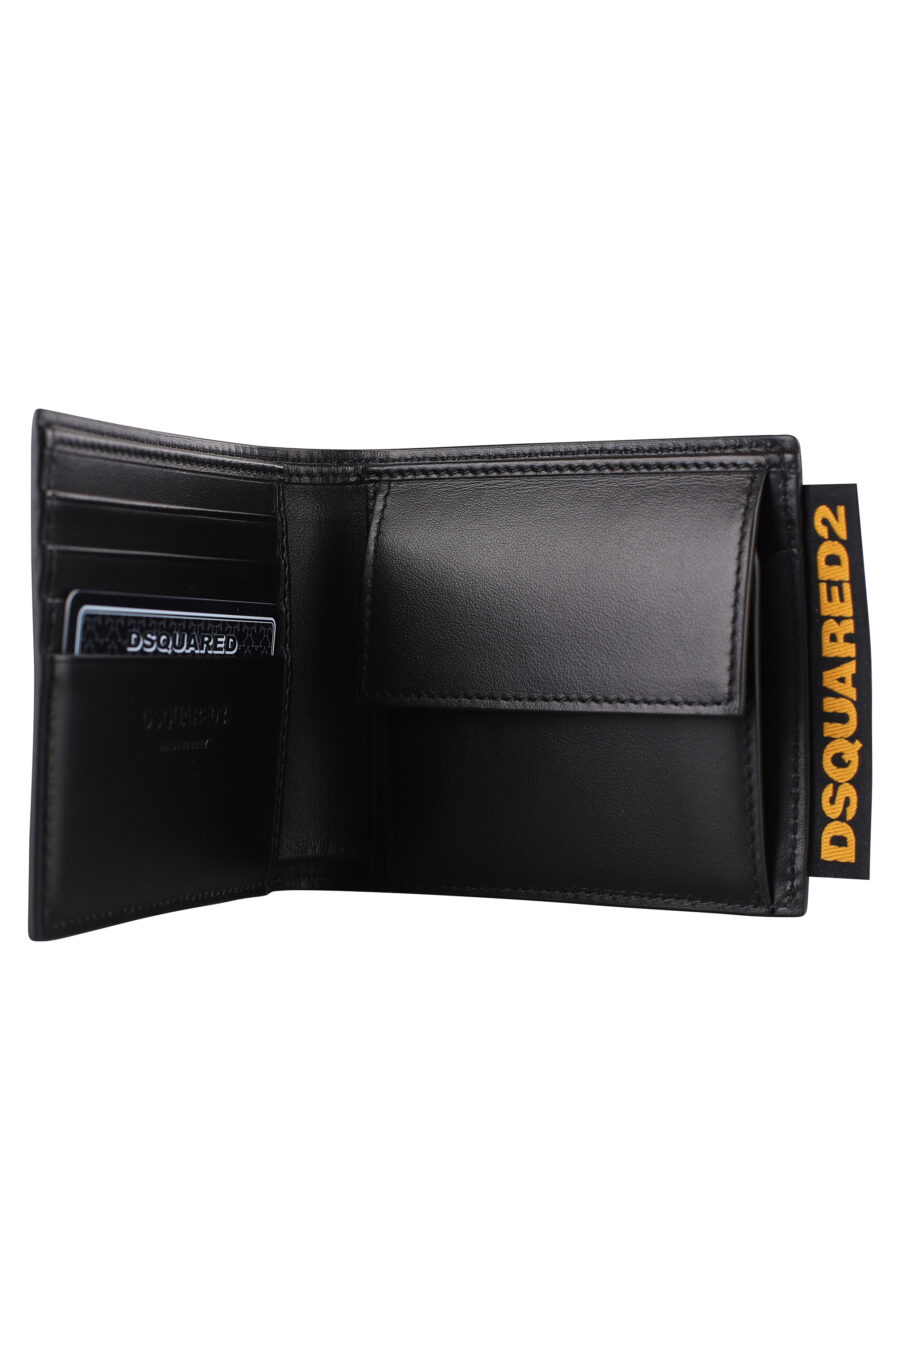 Black wallet with yellow label and logo - IMG 1271